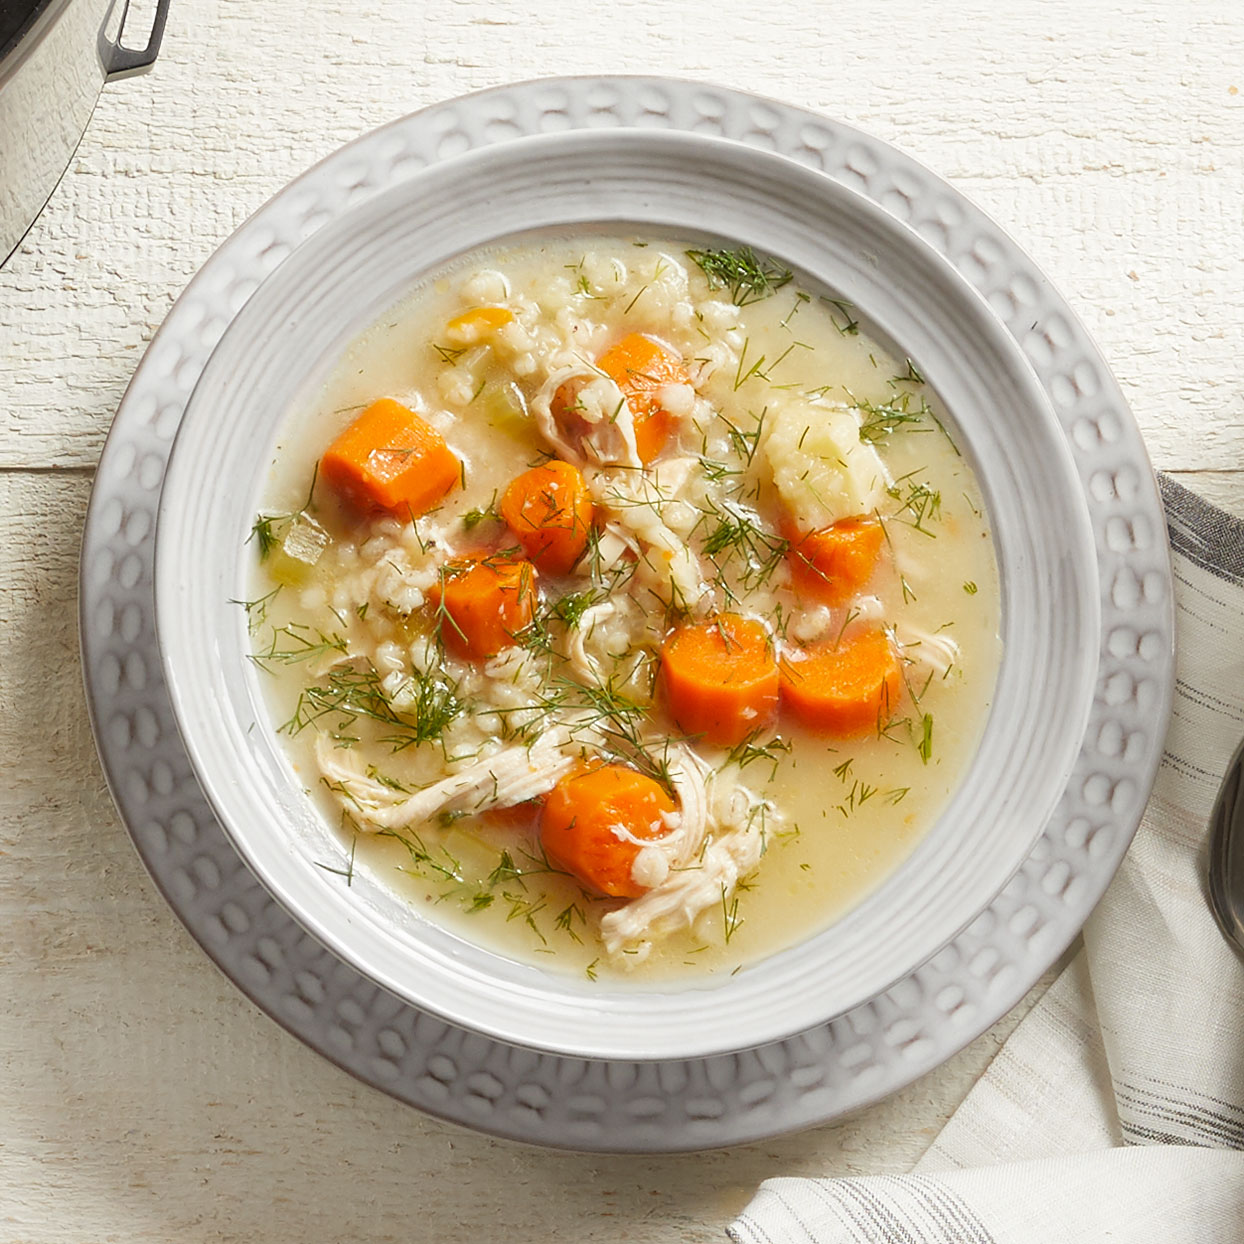 <p>Be sure to use bone-in chicken here--it enhances the flavor of the broth, and the bones are easy to remove after cooking. This healthy chicken soup can be made in an Instant Pot or pressure cooker.</p>
                          